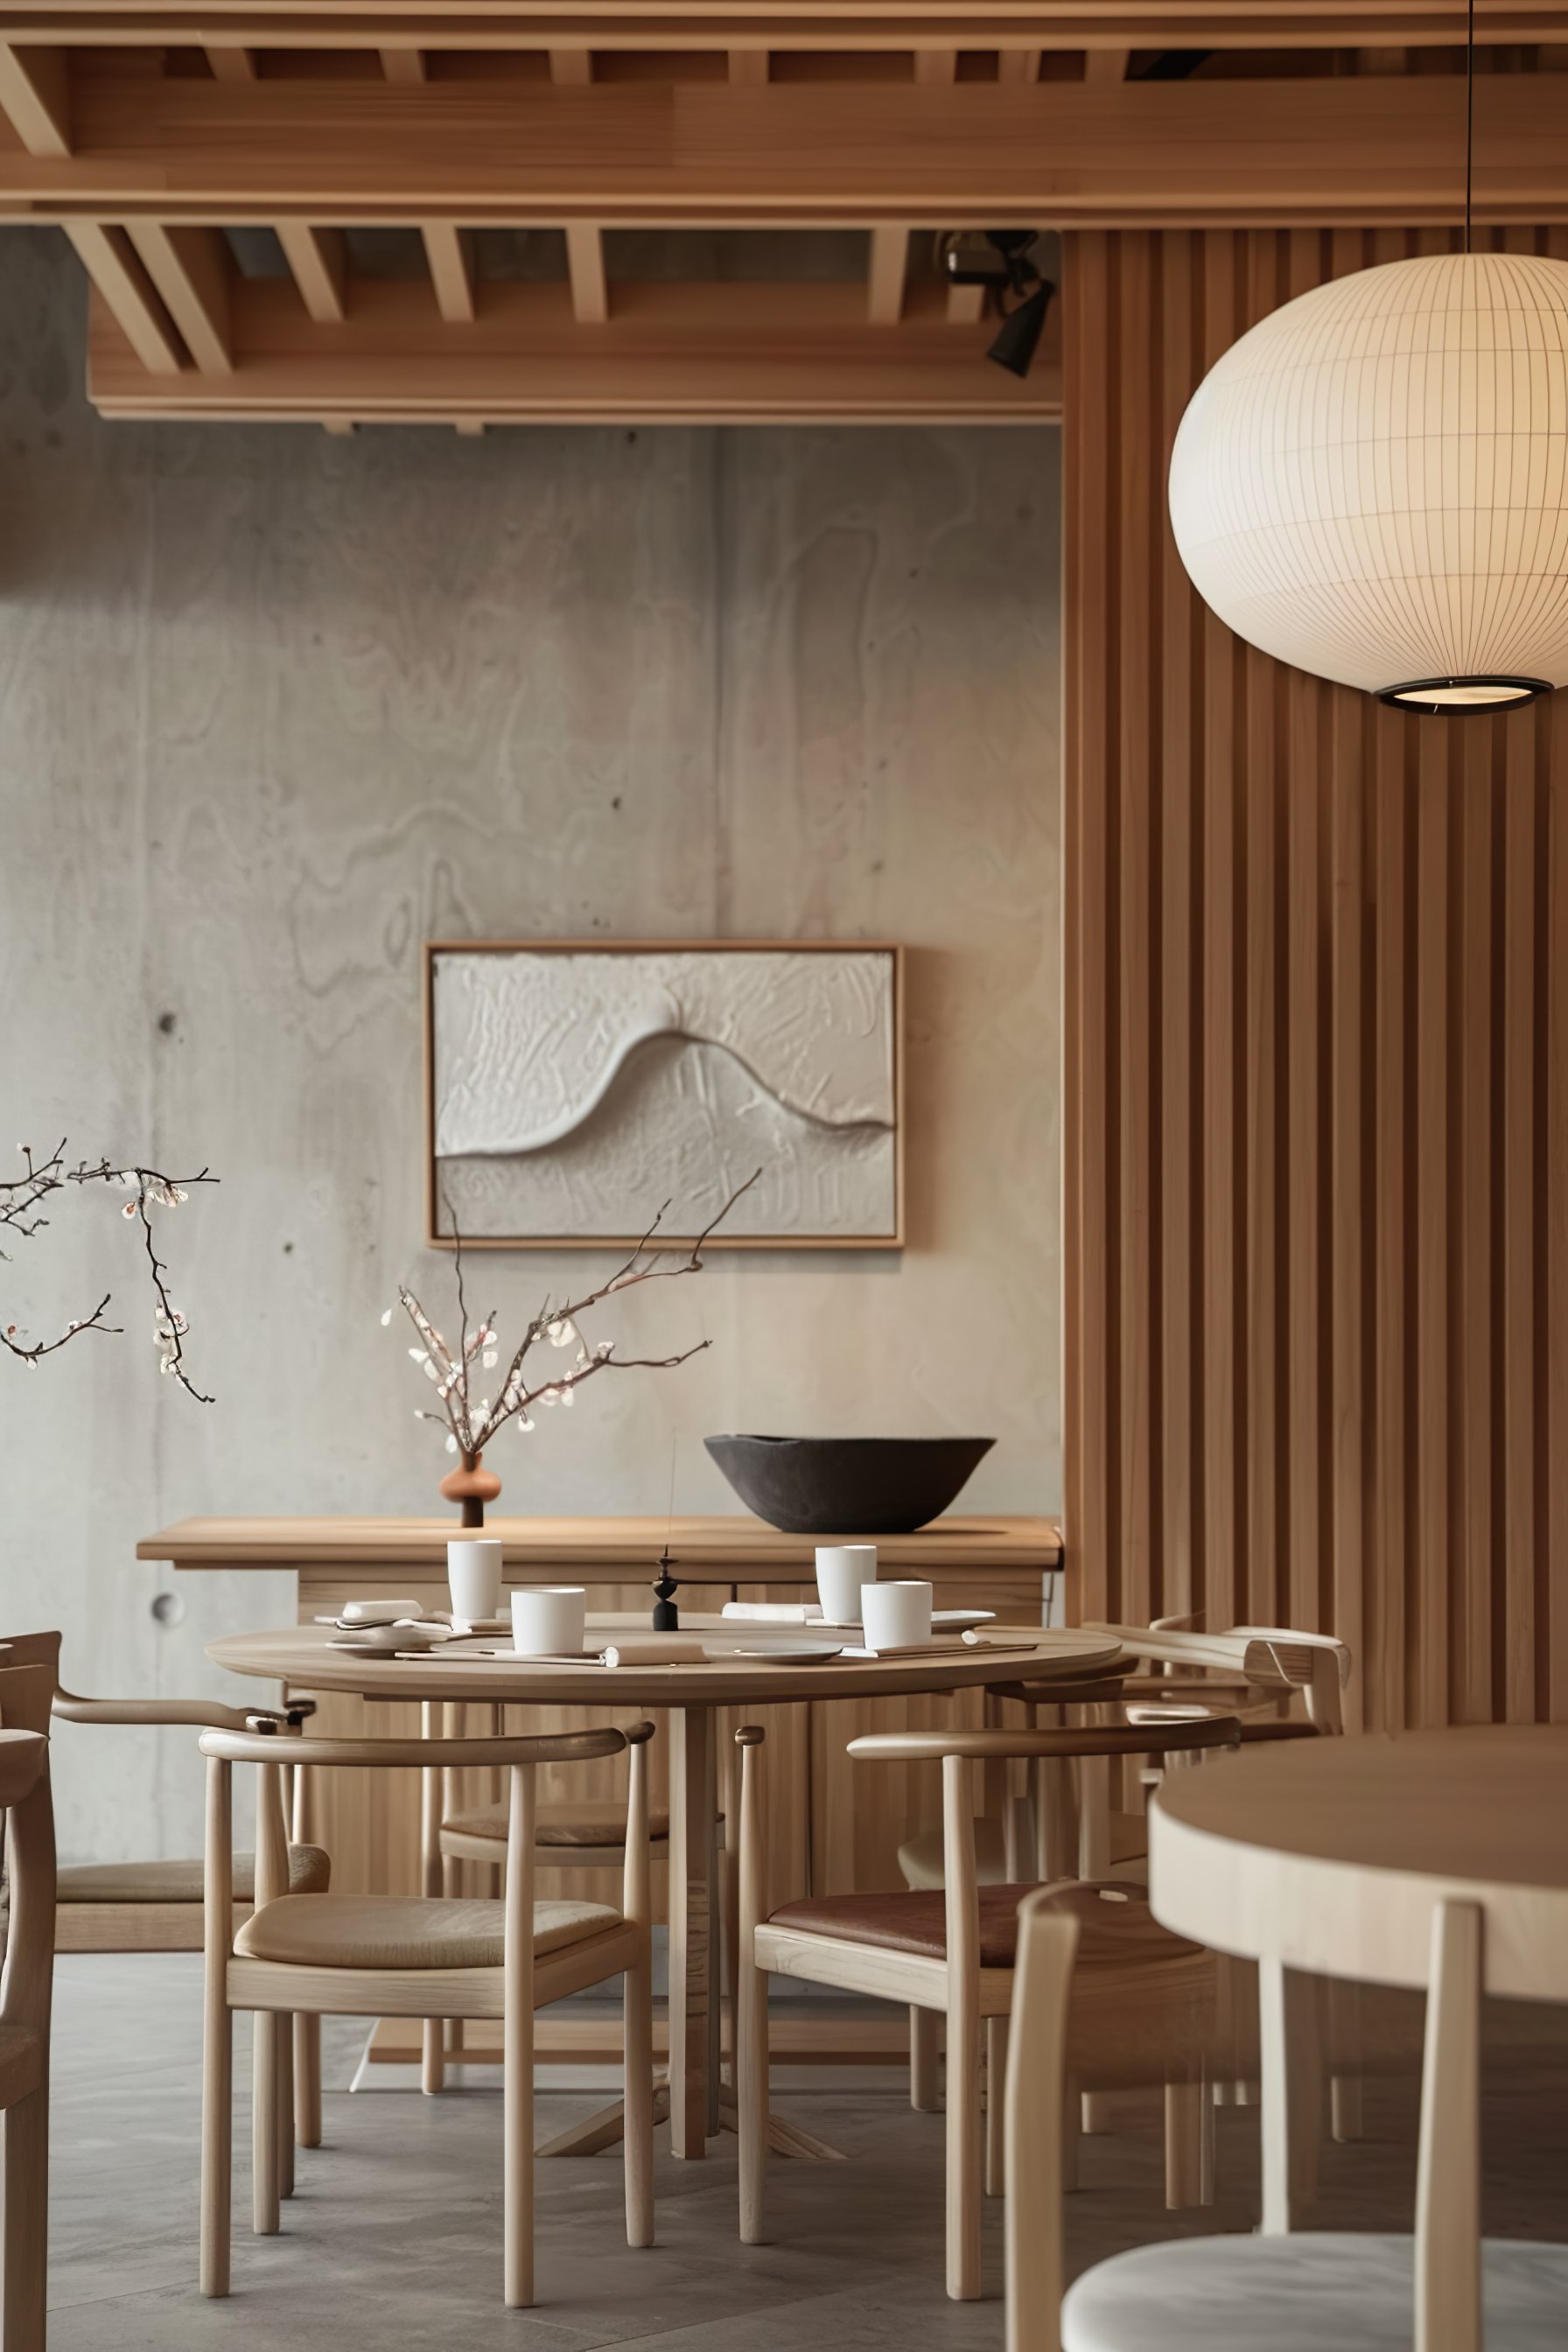 A modern dining space with wooden tables, chairs, a large paper pendant lamp, and a textured wall art piece in a neutral-toned interior.